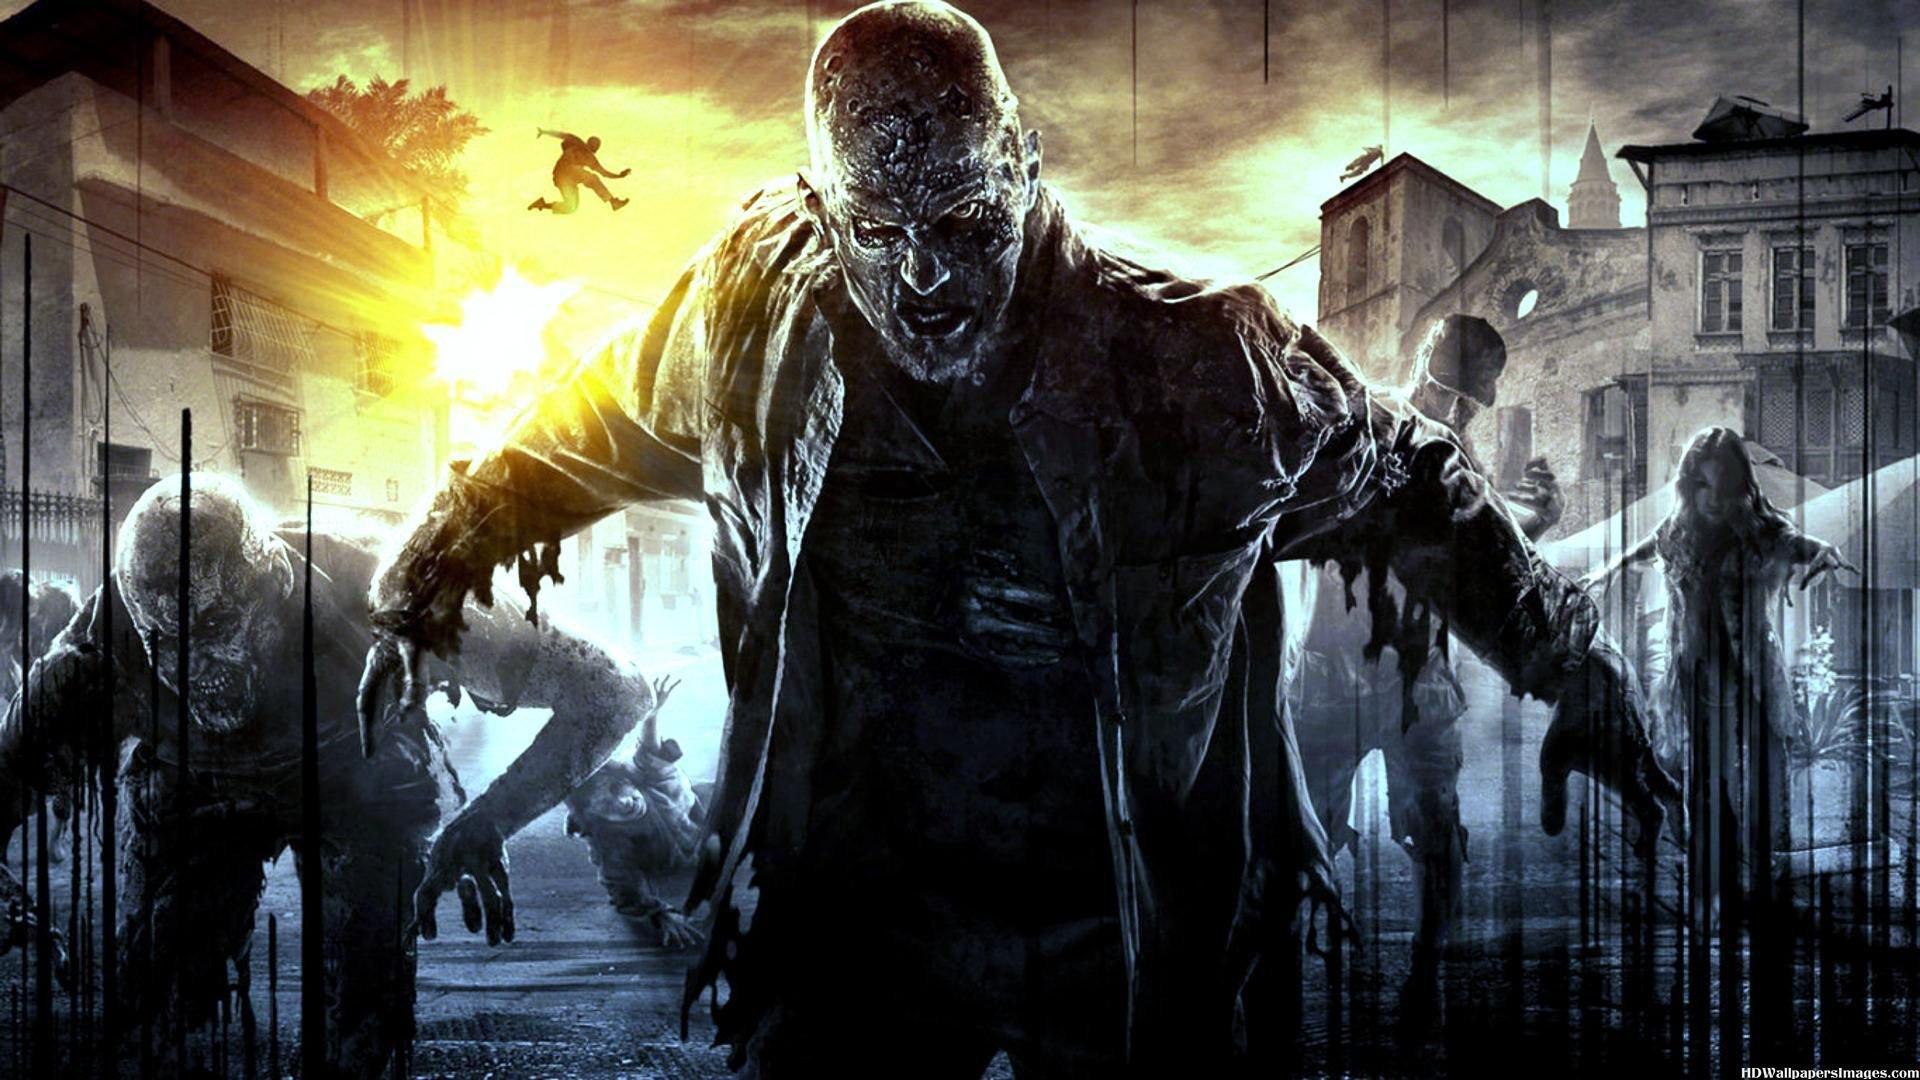 Dying Light Horror Survival Zombie Apocalyptic Dark Action 1dlight Rpg